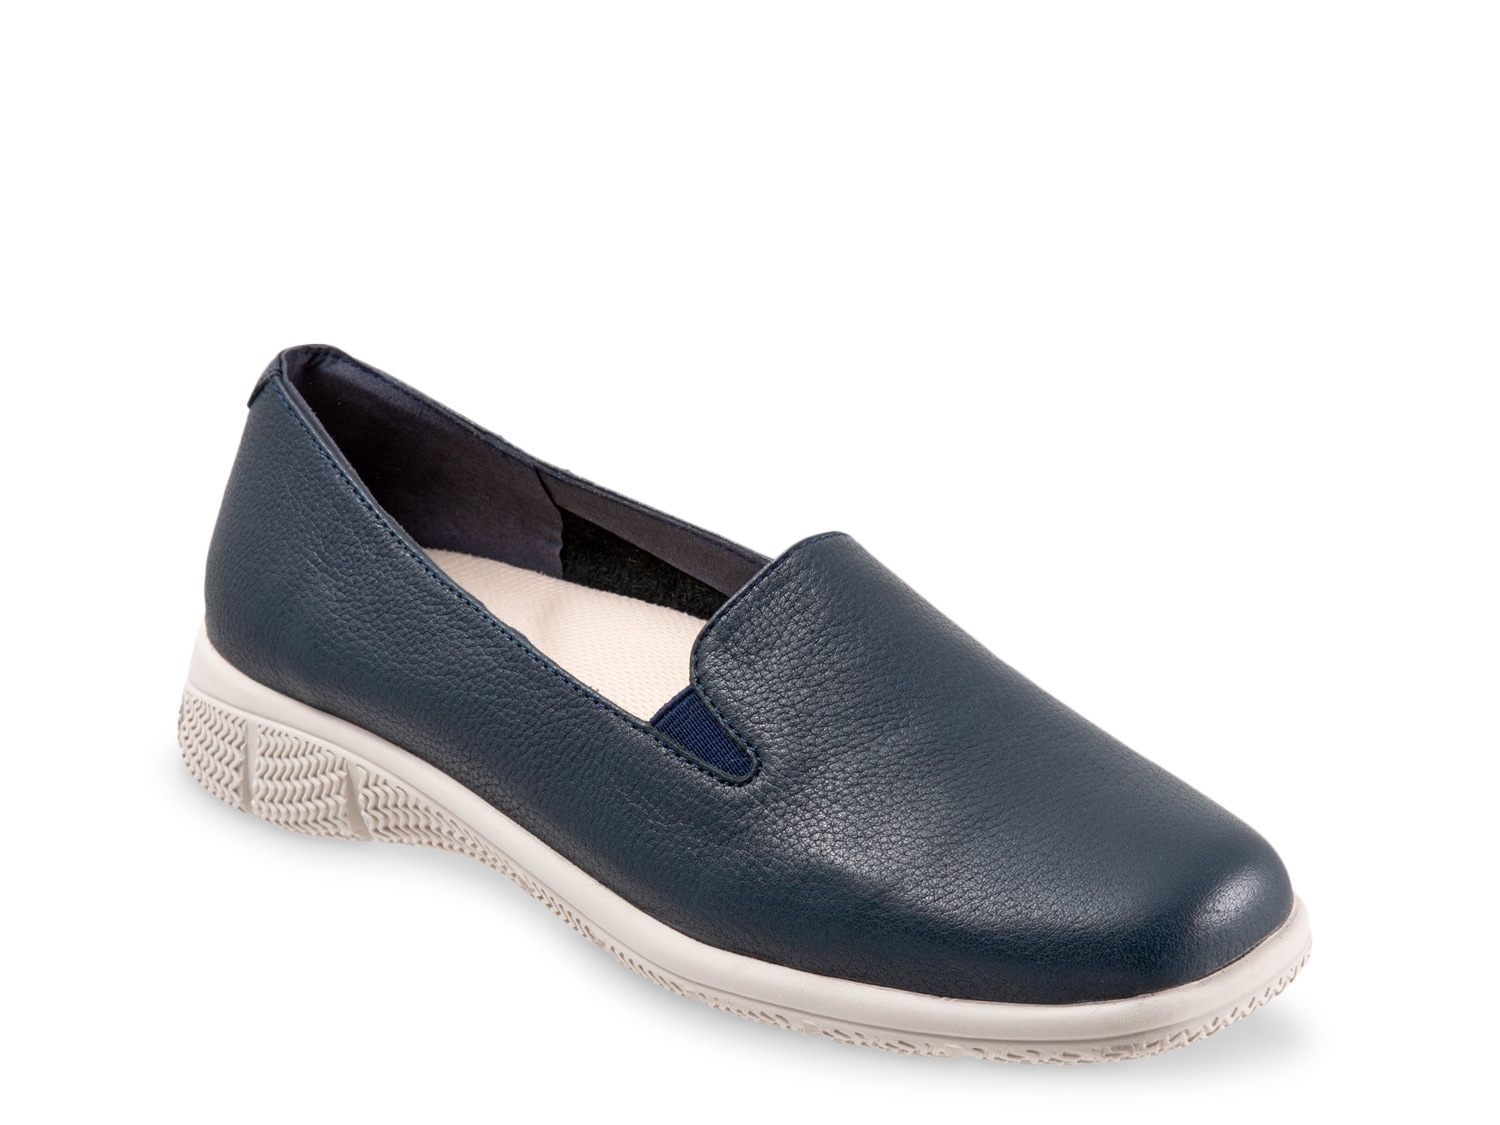 Trotters Universal Loafer - Free Shipping | DSW